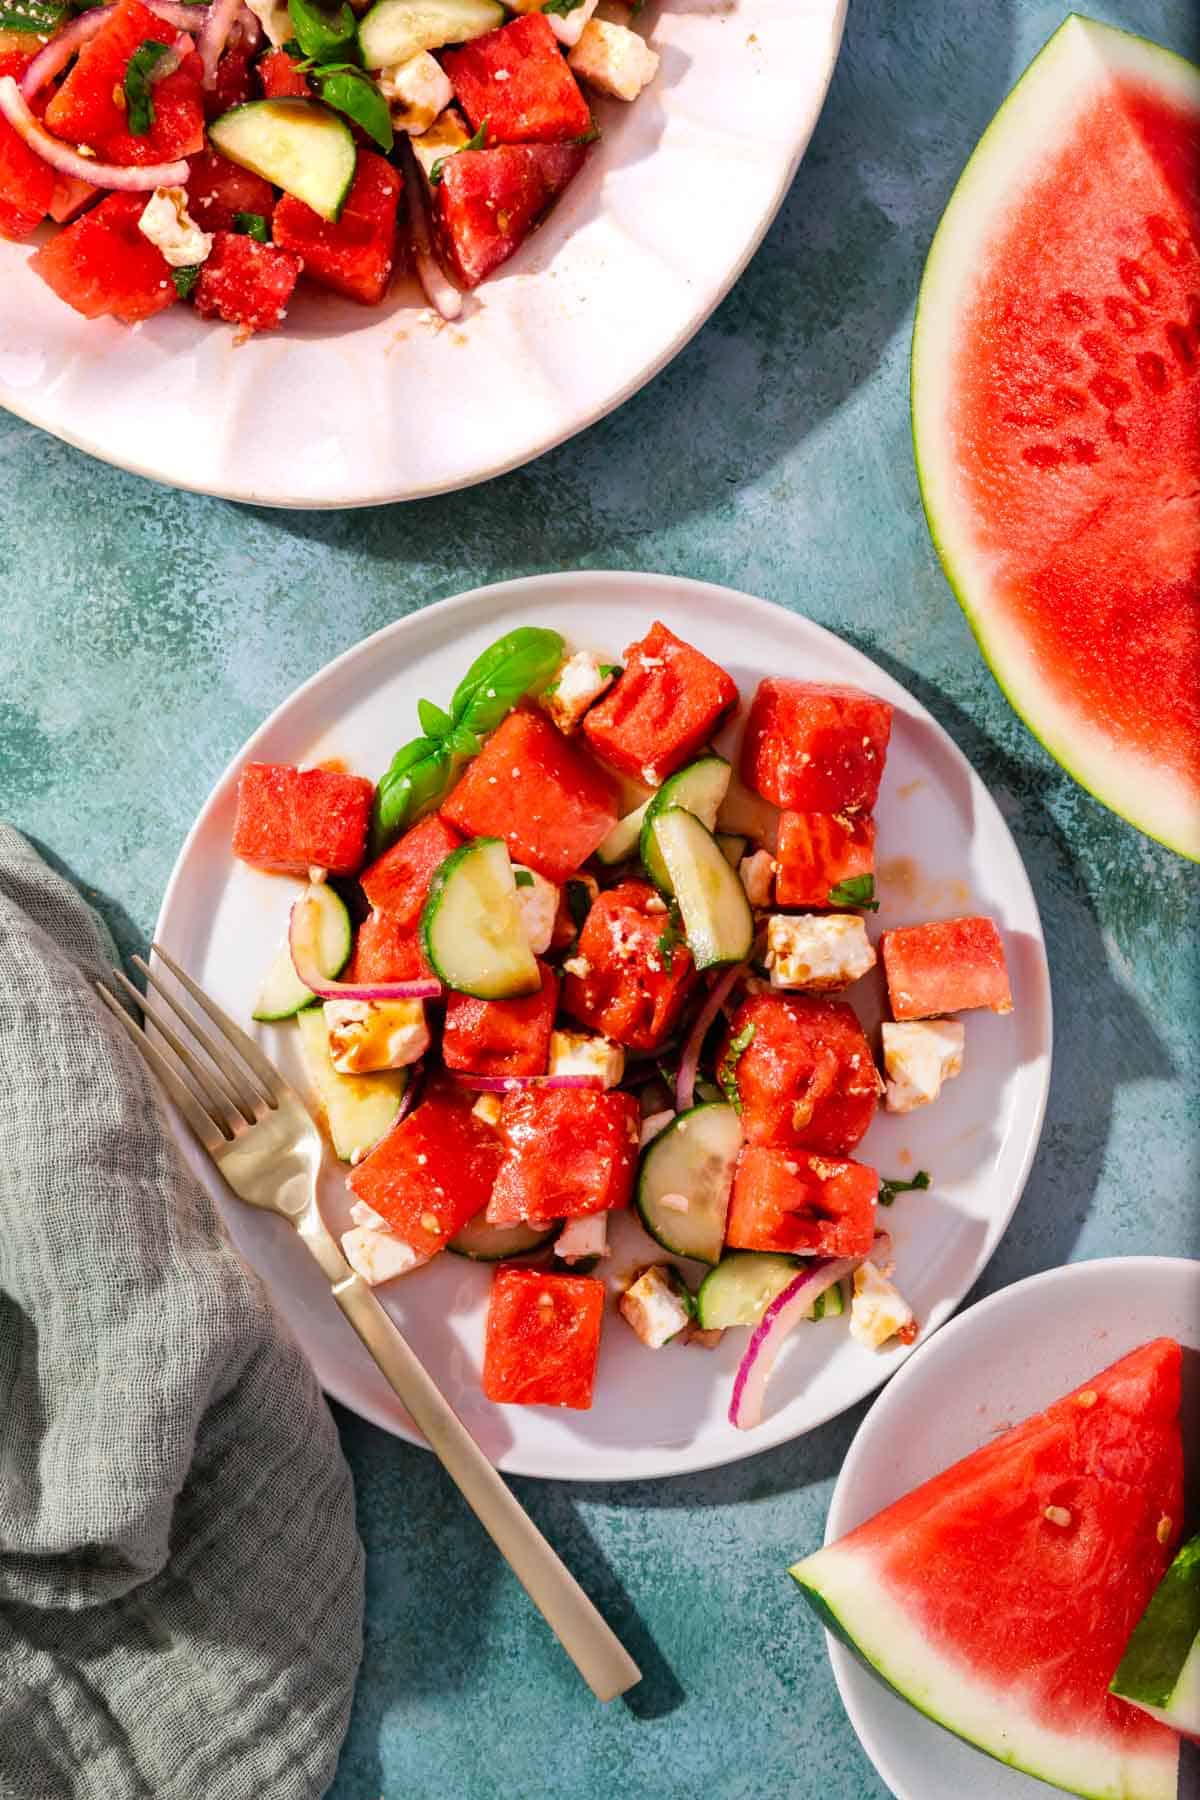 A salad plate with watermelon feta cucumber salad on it with large pieces of watermelon on teh side.